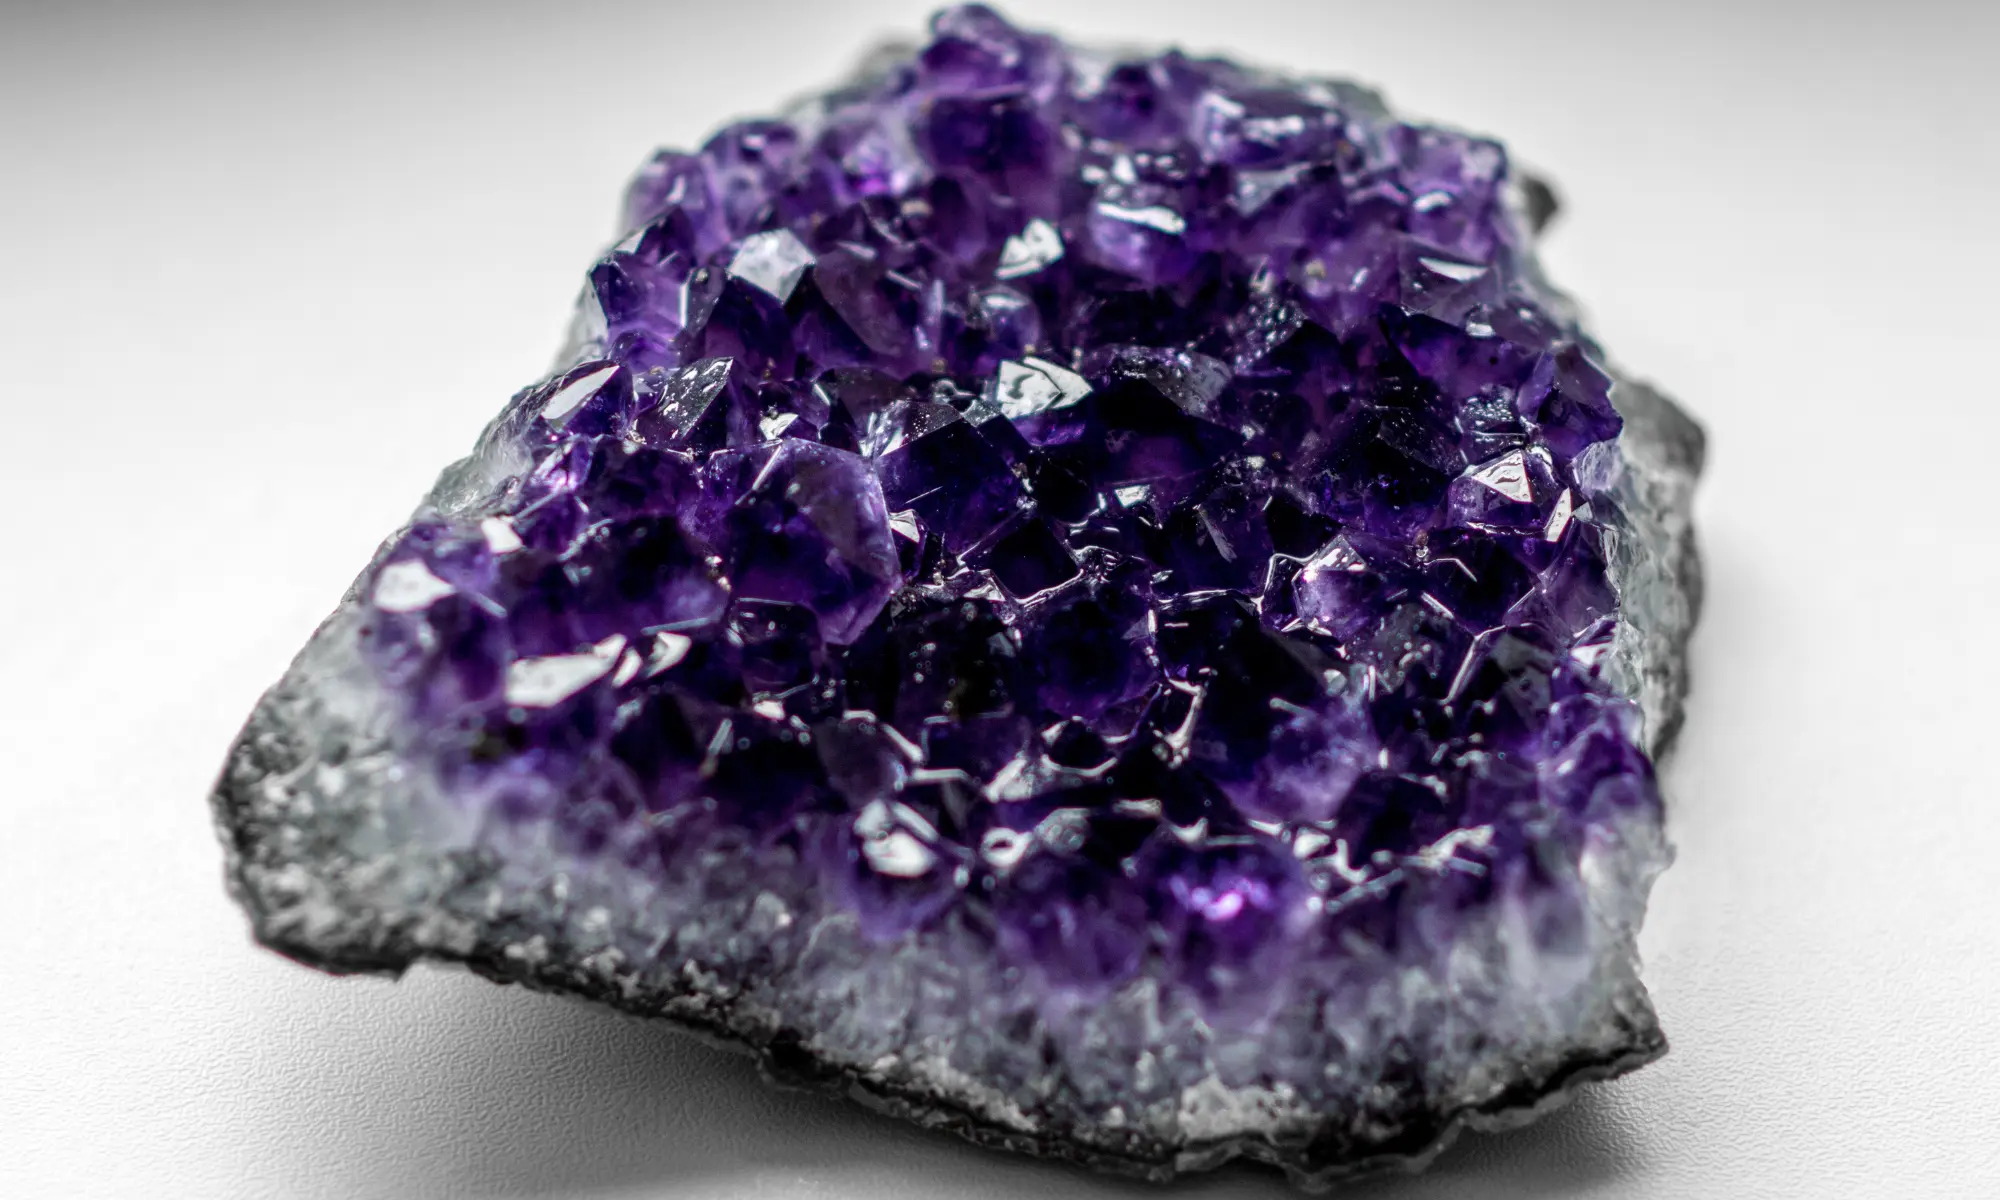 Close-up of a purple amethyst crystal.